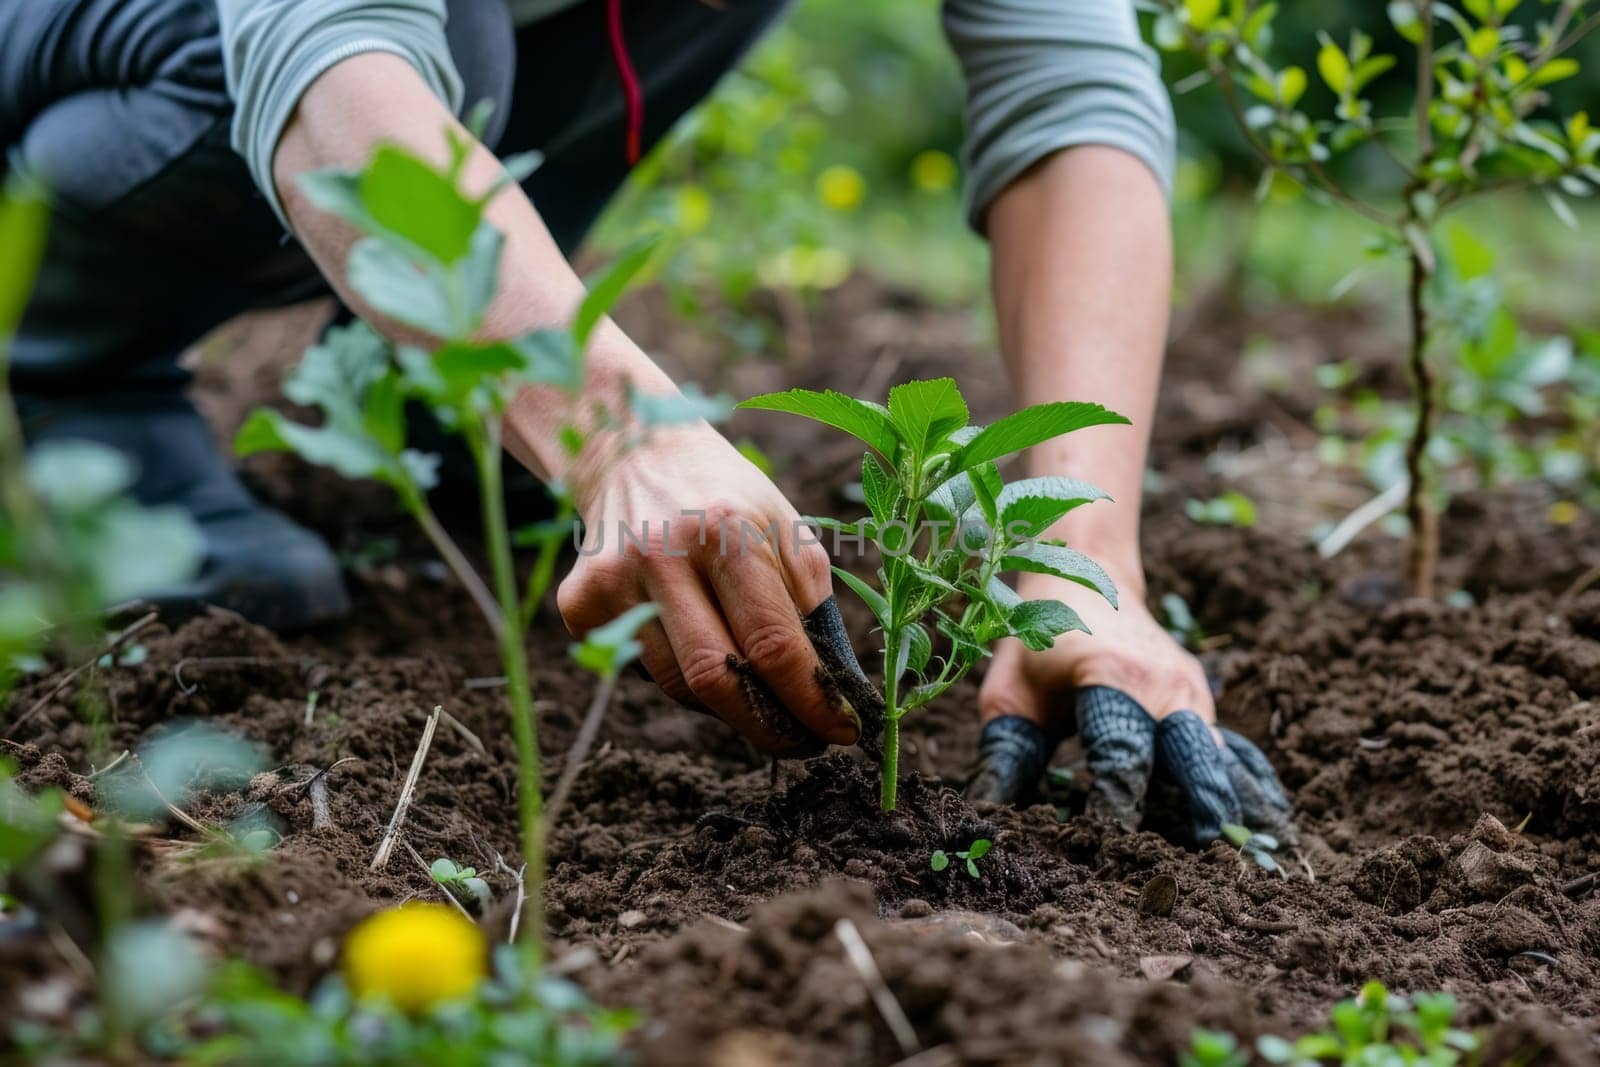 Hands carefully planting a sapling in fertile soil, symbolizing growth, renewal, and the importance of environmental stewardship.